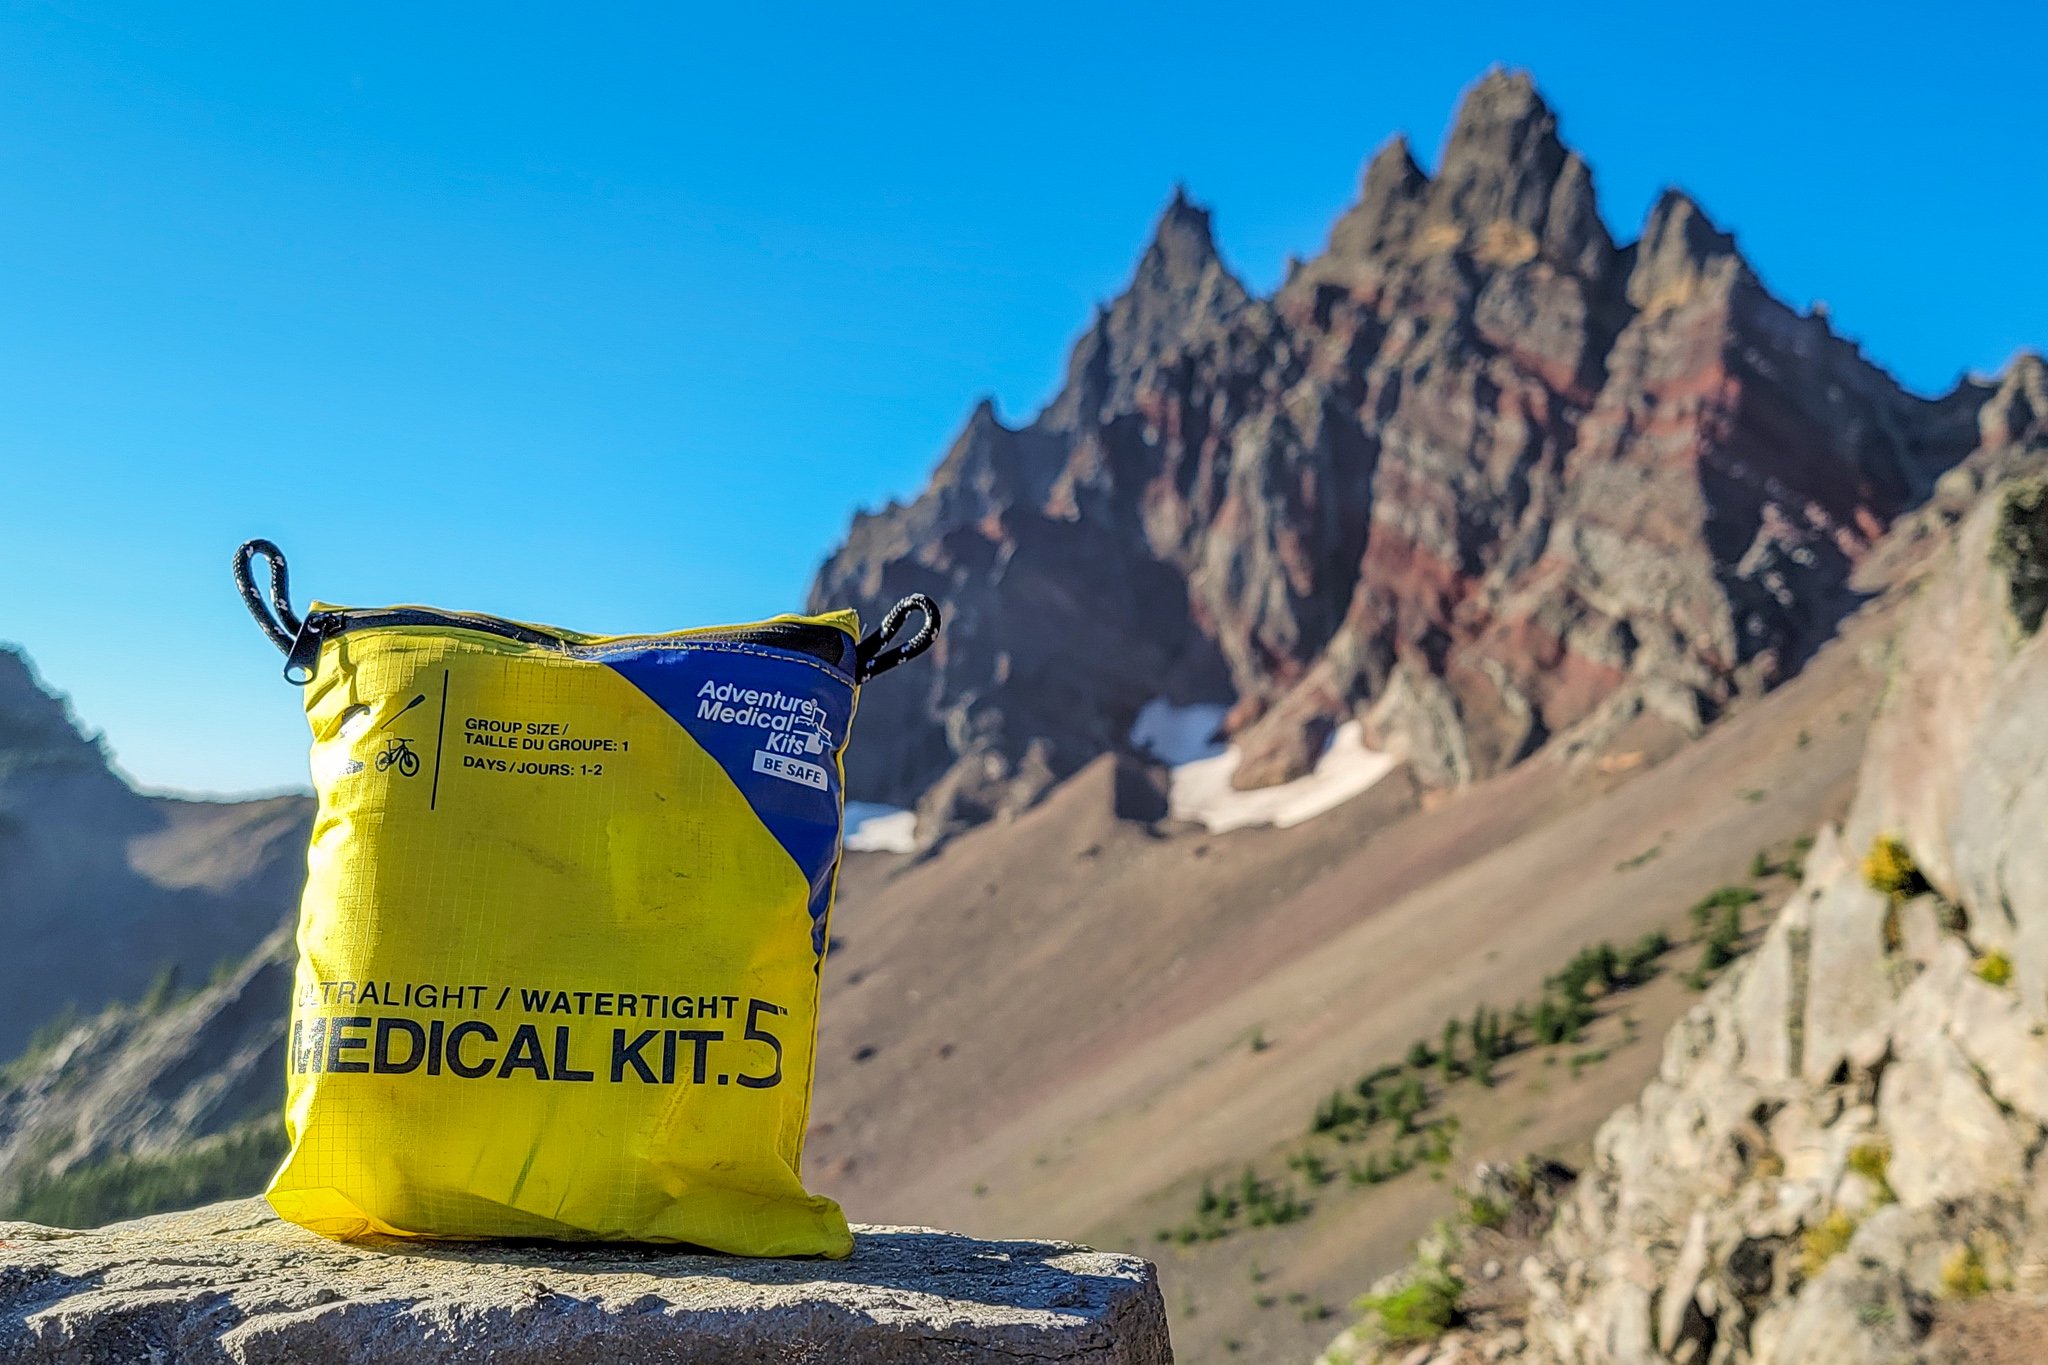 Closeup of the AMK Ultralight/Watertight .5 First Aid Kit in front of a craggy mountain peak - Three Fingered Jack